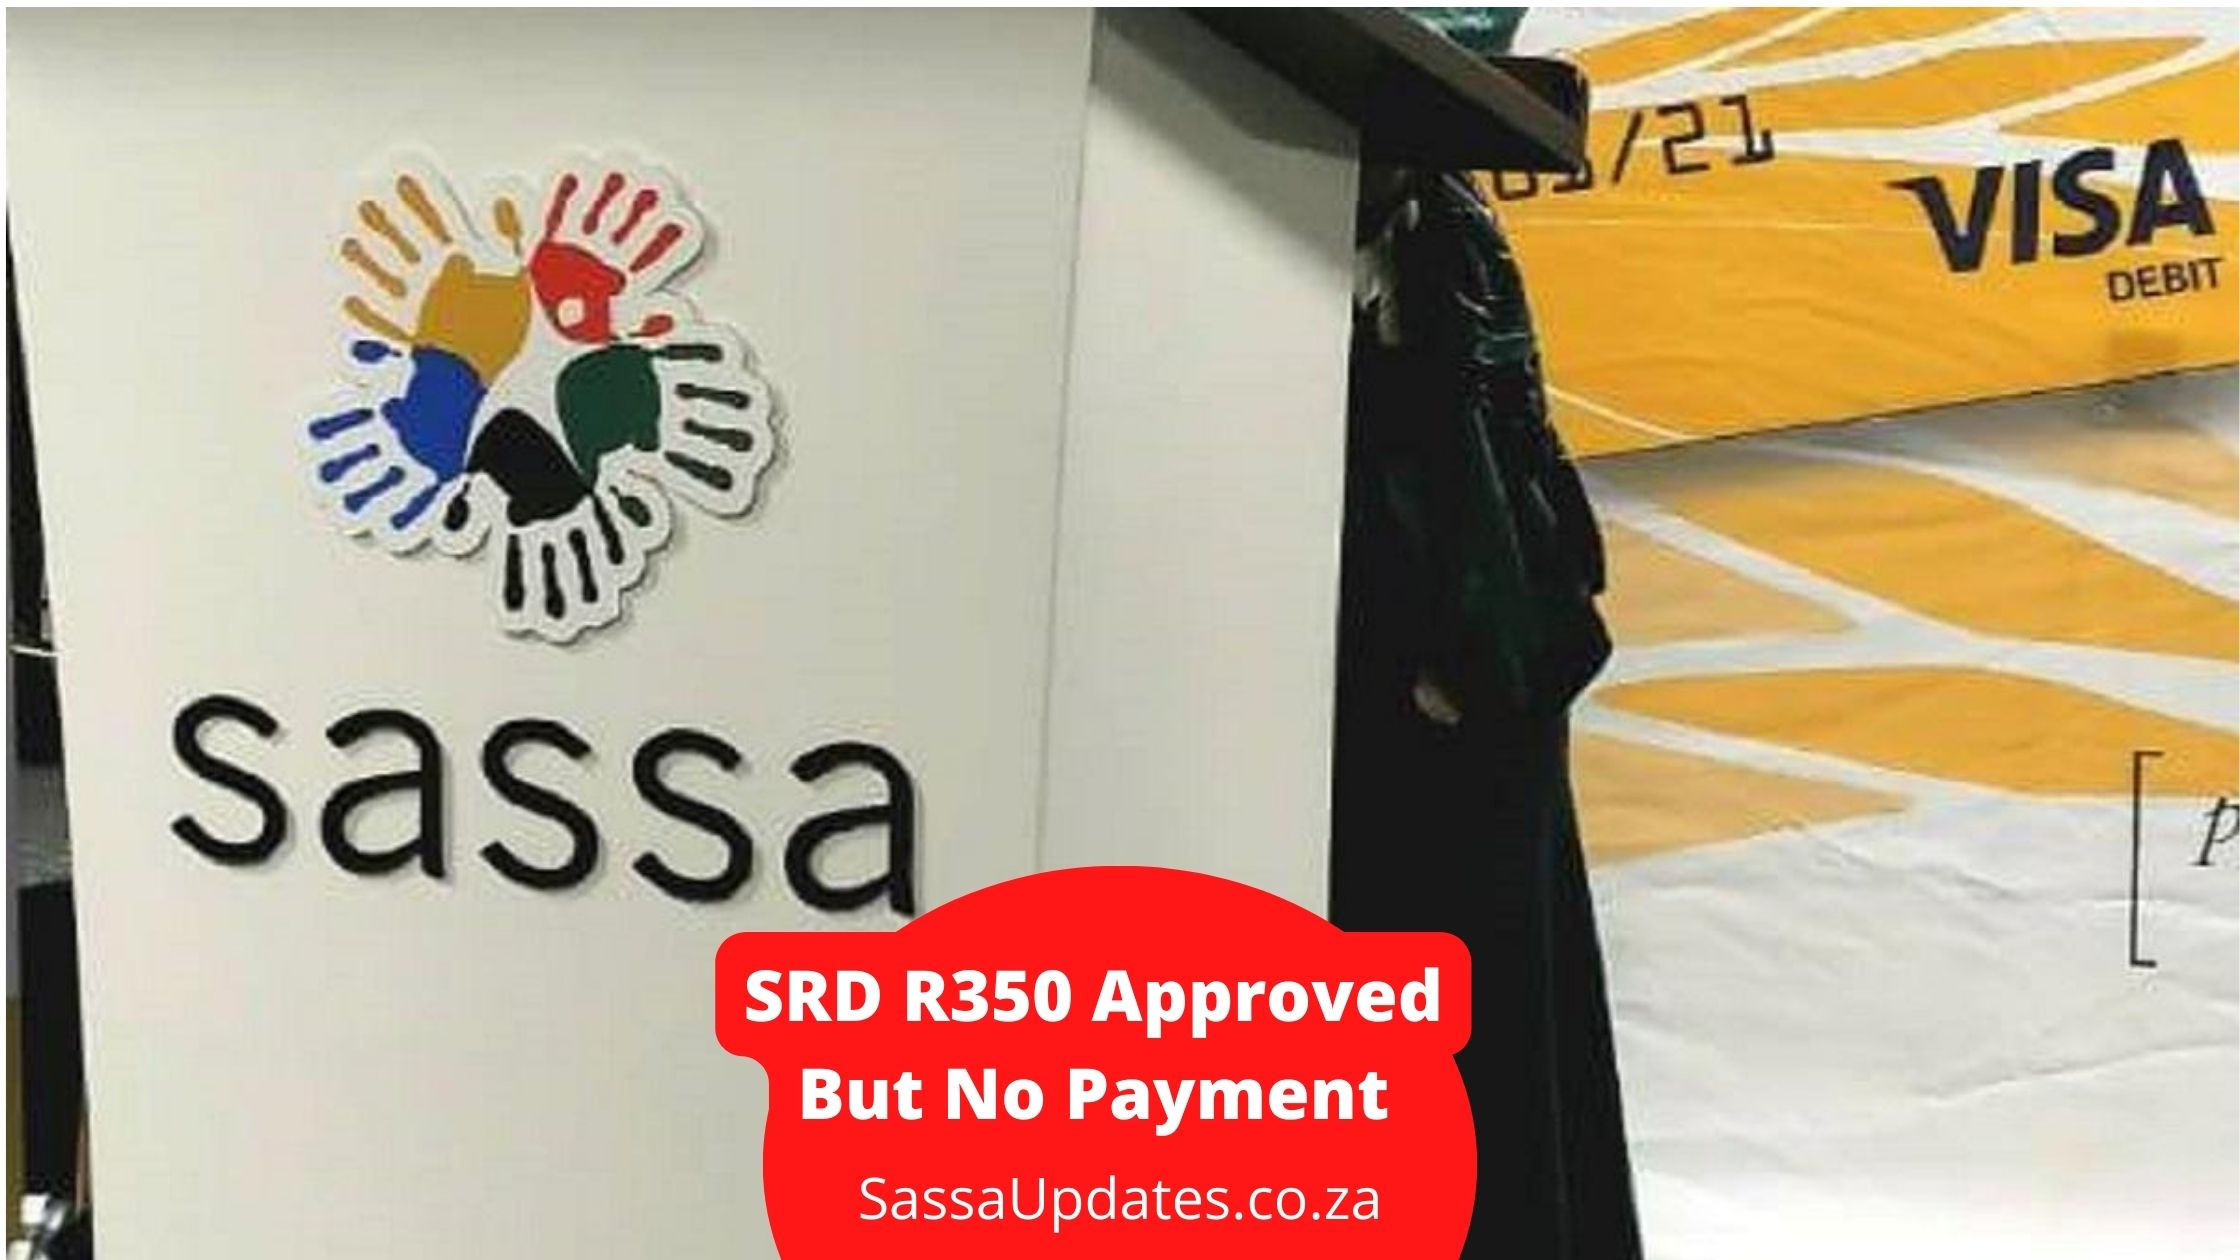 SRD R350 Approved But No Payment